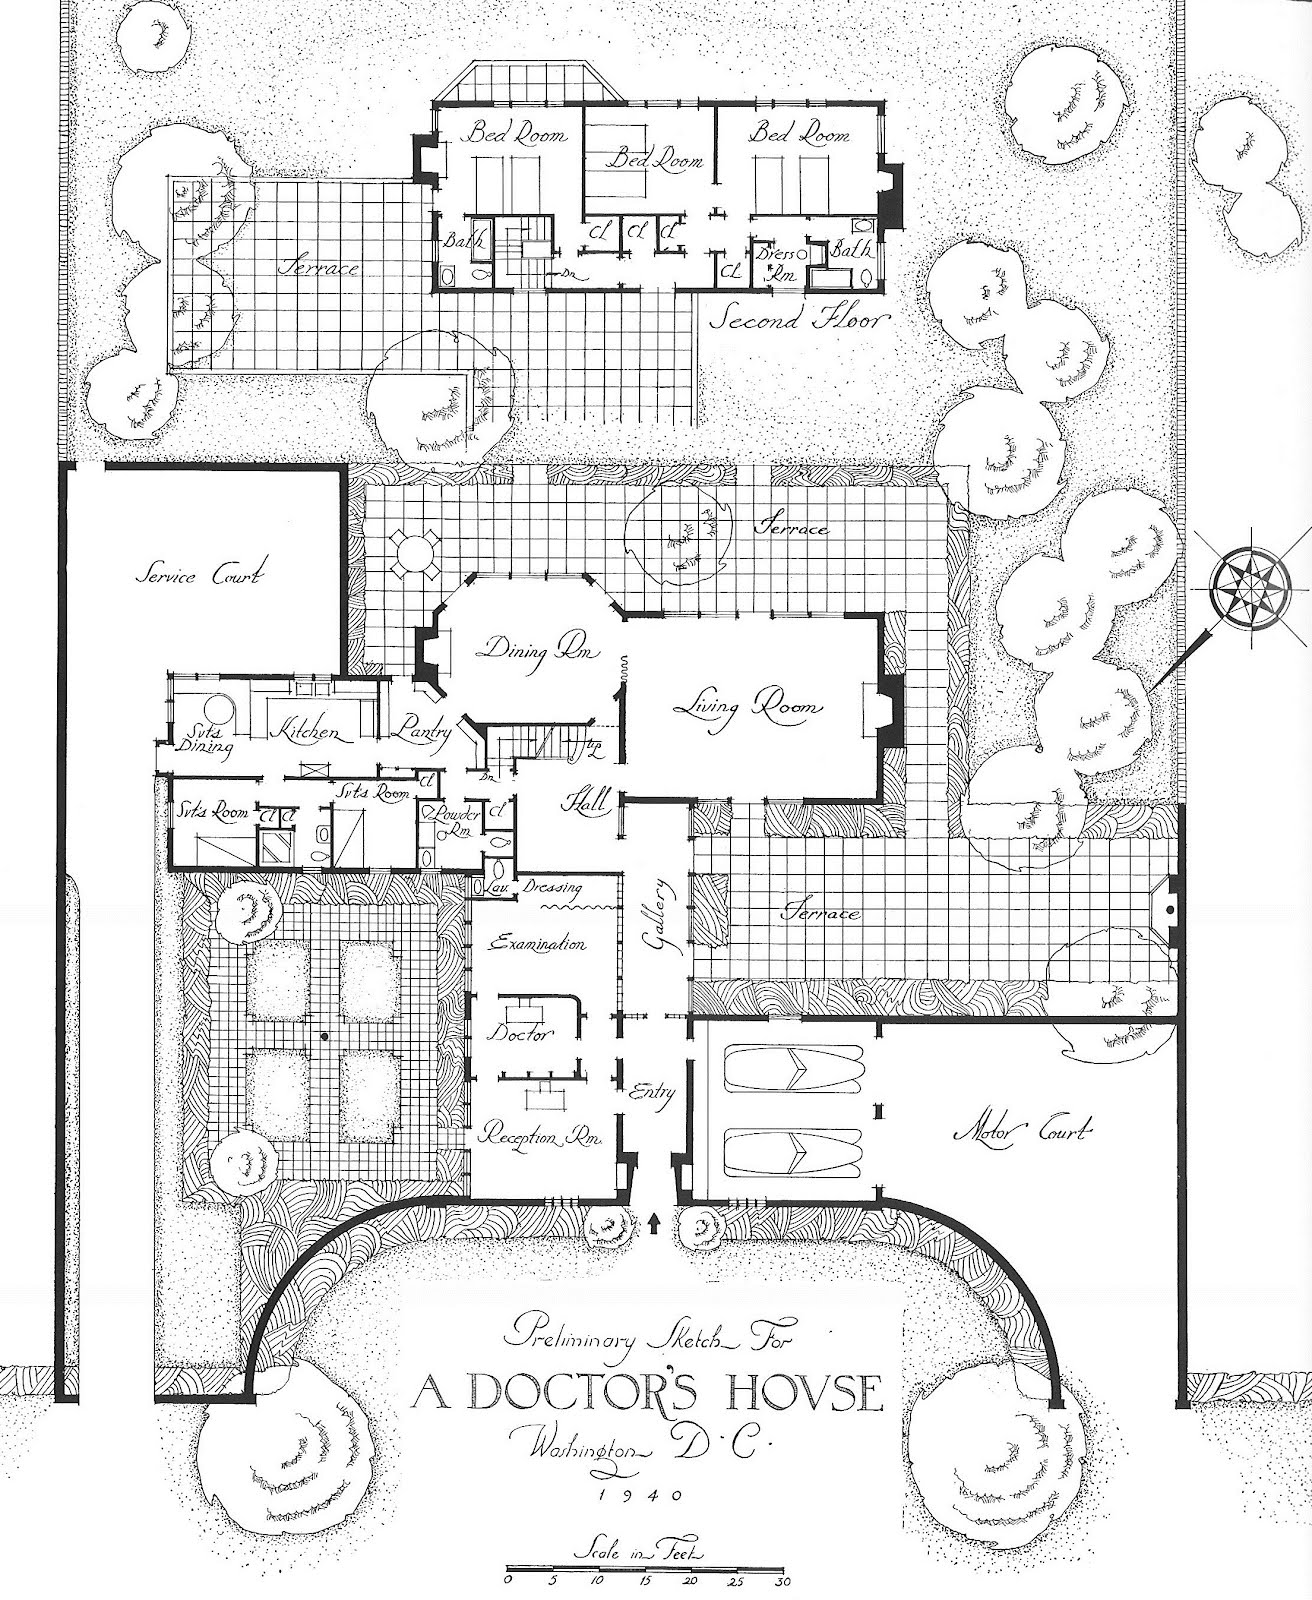 architect design™: House plan for a doctor